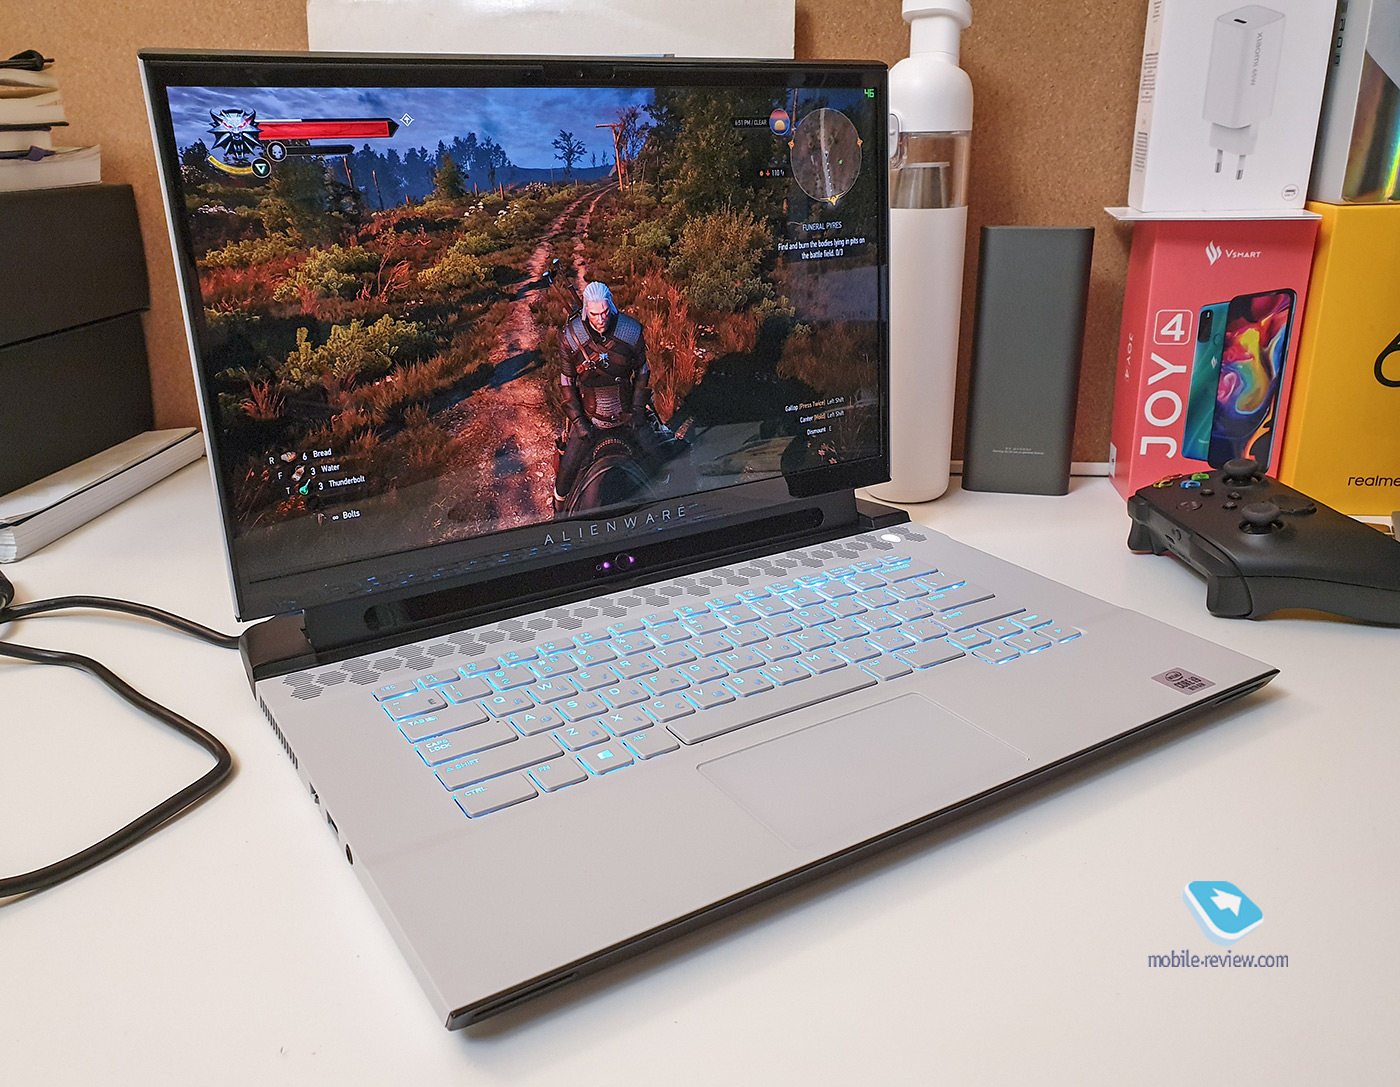 Dell Alienware m15 R3 review: OLED screen and GeForce RTX 2080